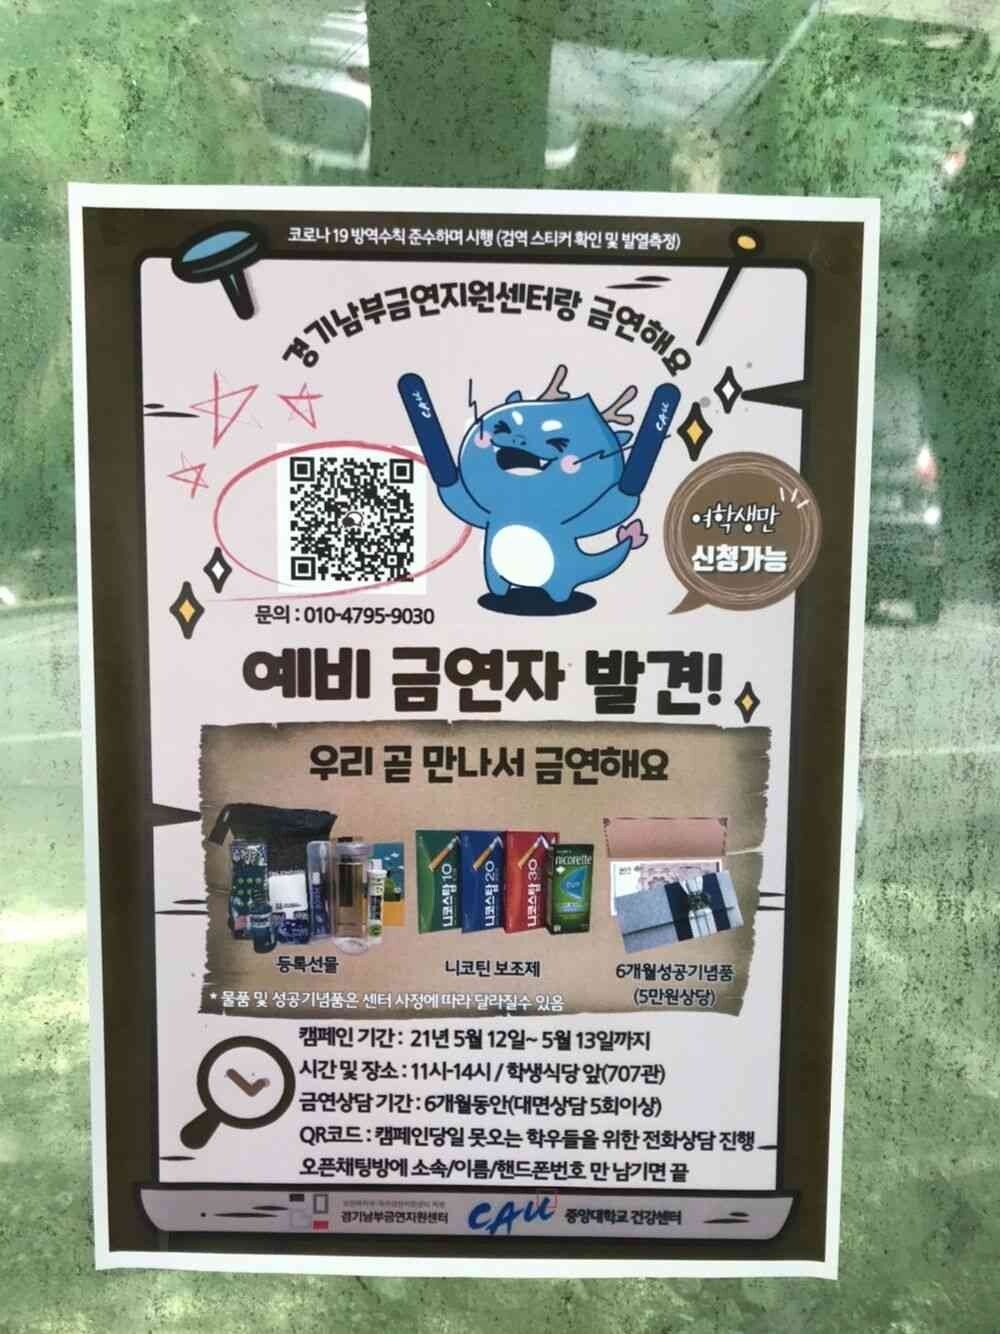 Update on Gyeonggi Southern Non-smoking Support Center